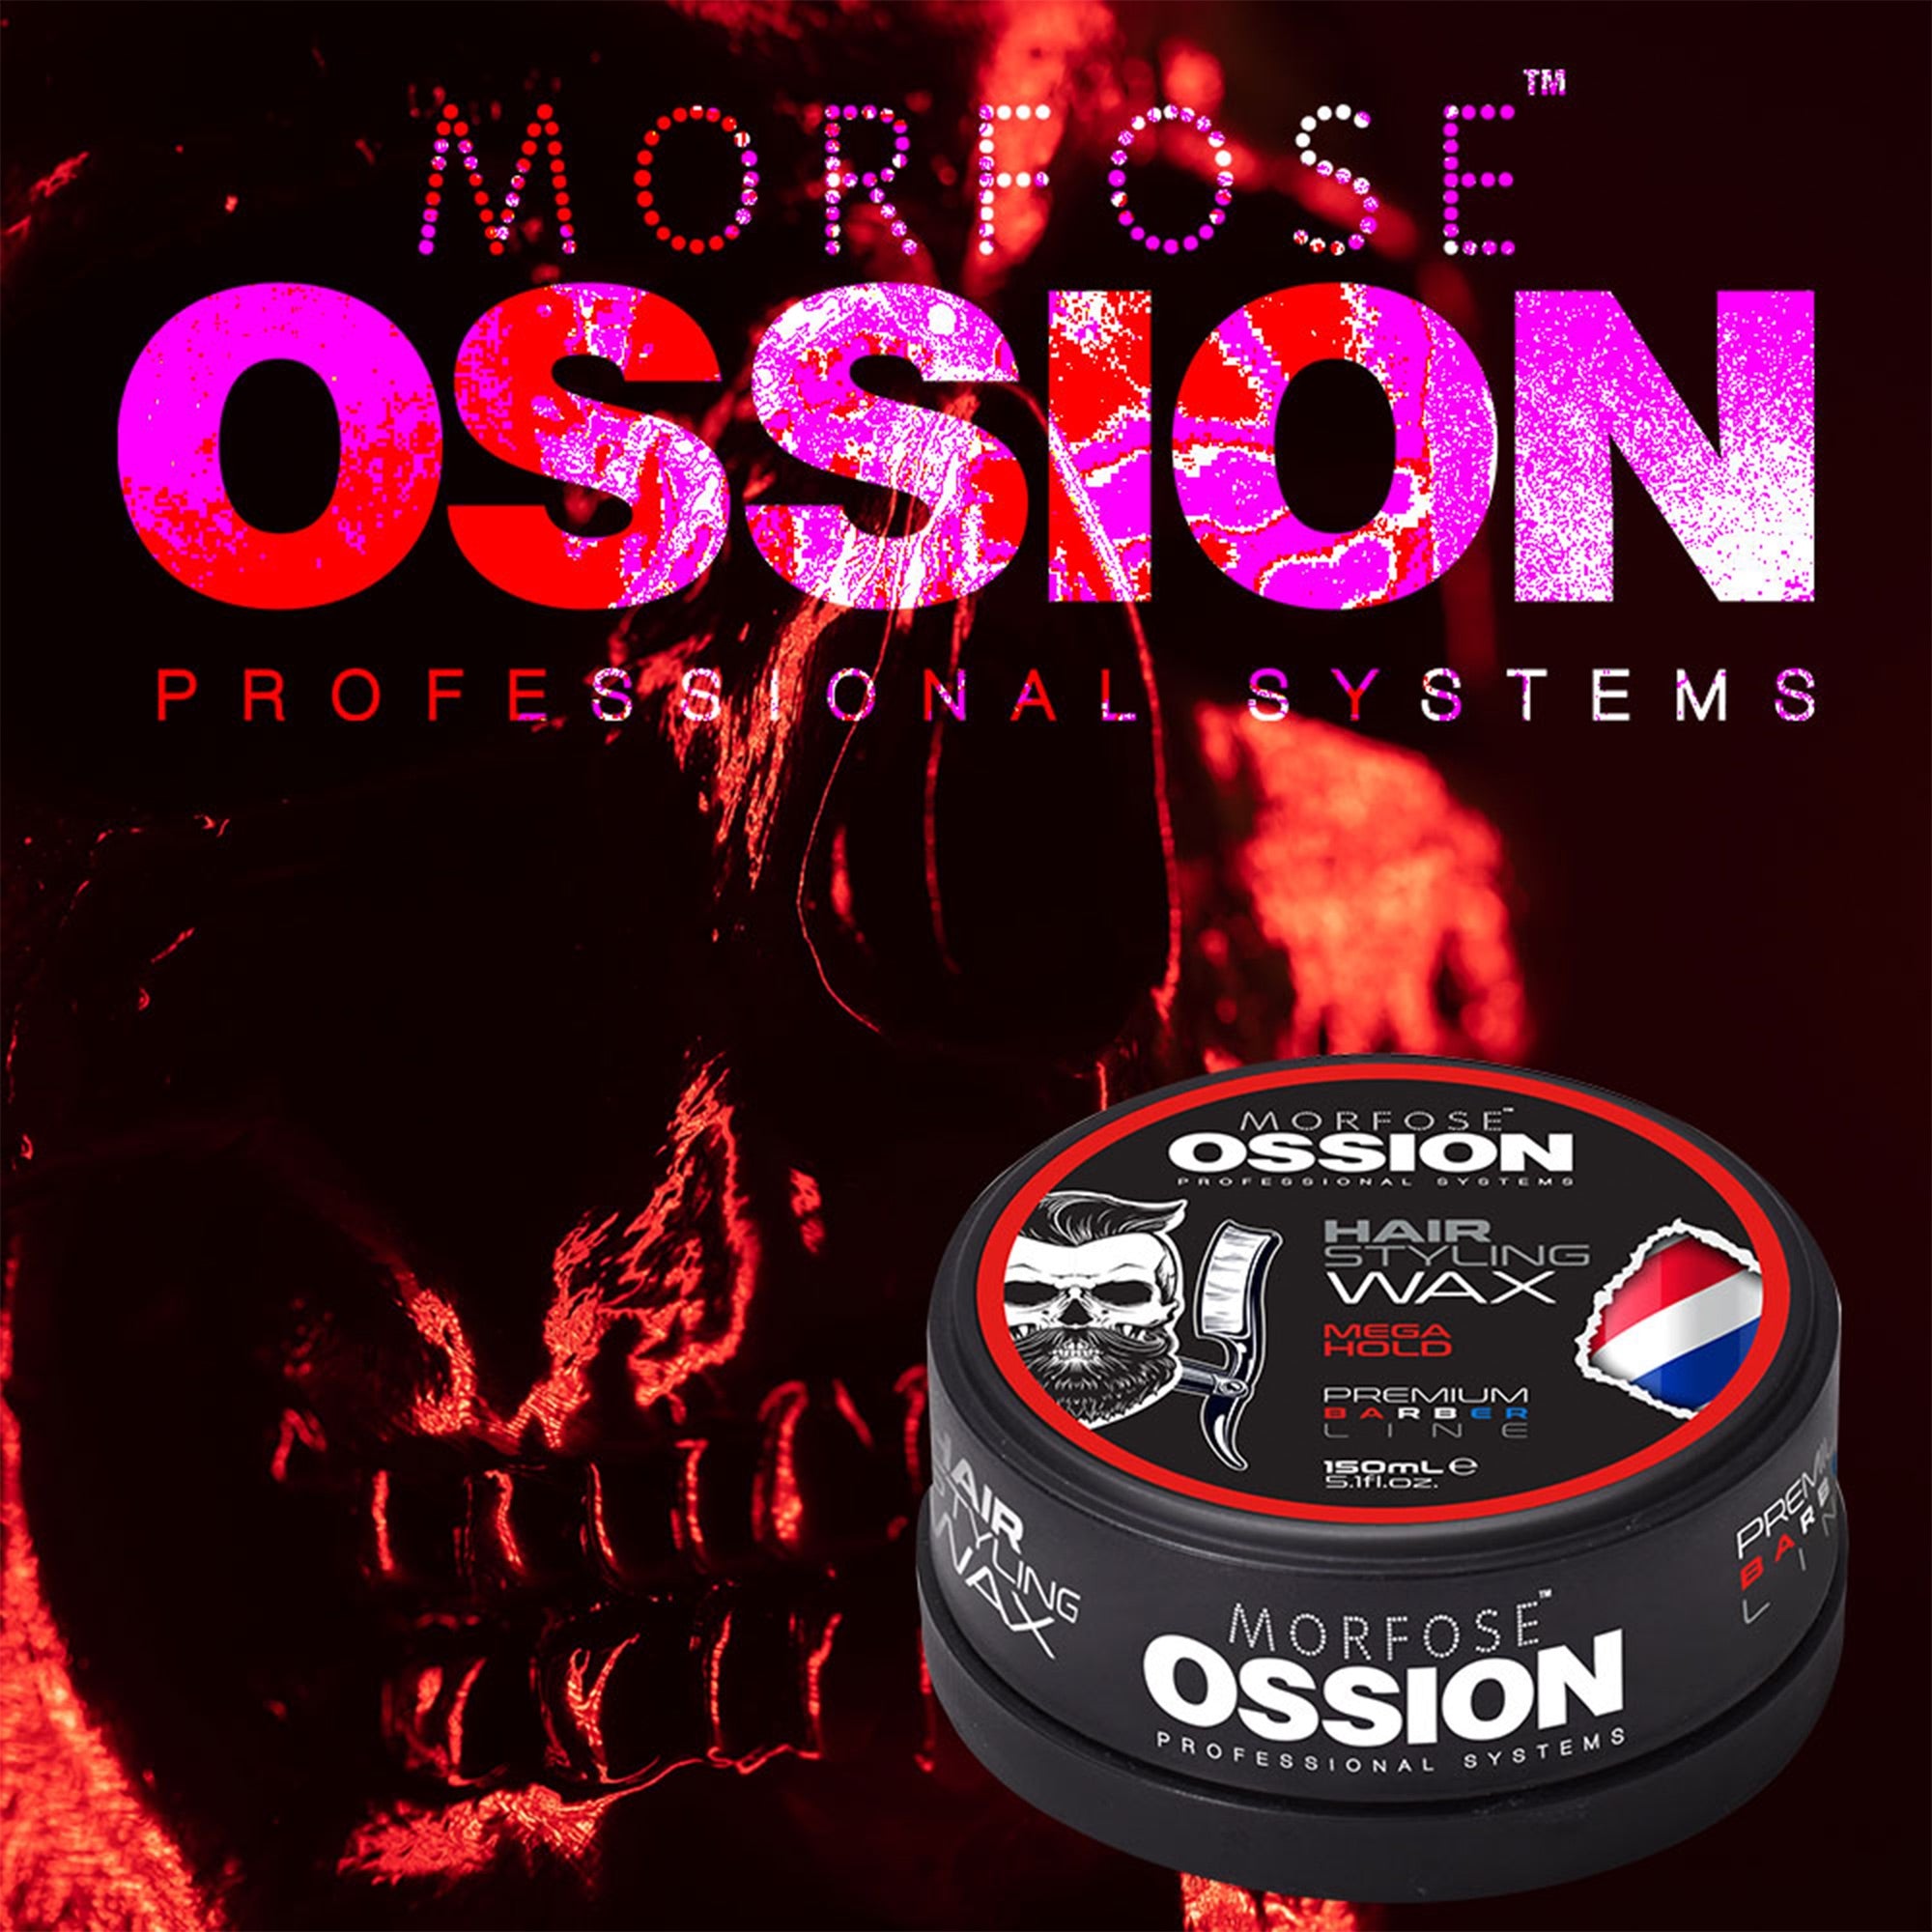 Morfose - Ossion Mega Hold Hair Styling Wax 150ml